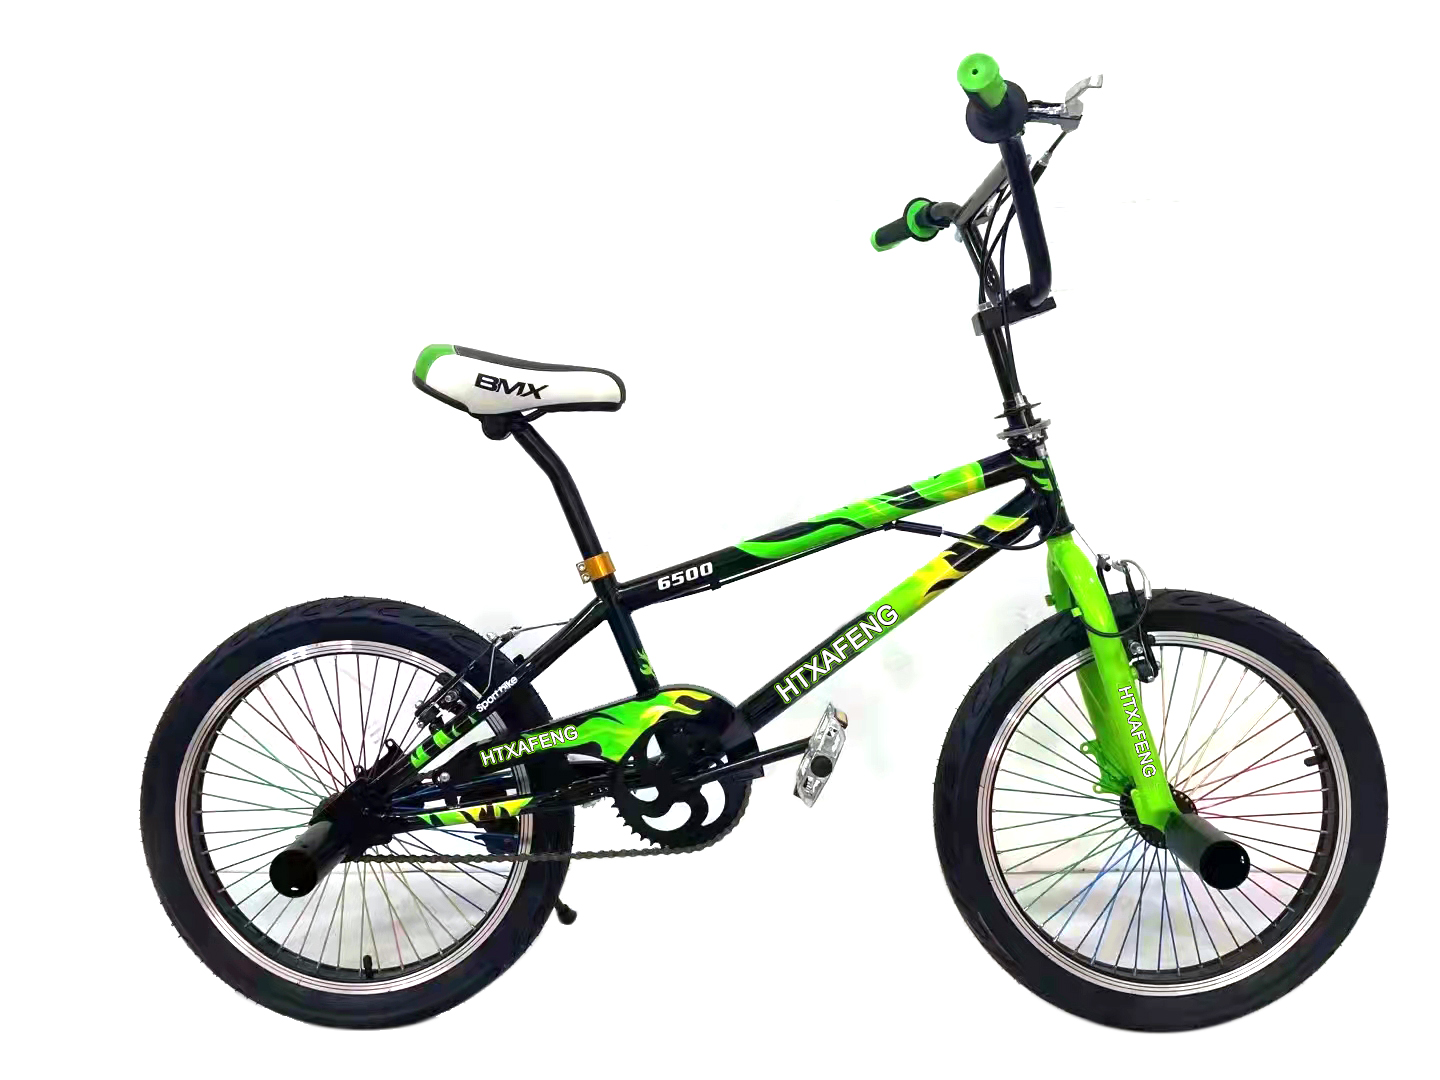 2022 new Kids Bicycle Best Quality And Cheap Price bicycle kids ...